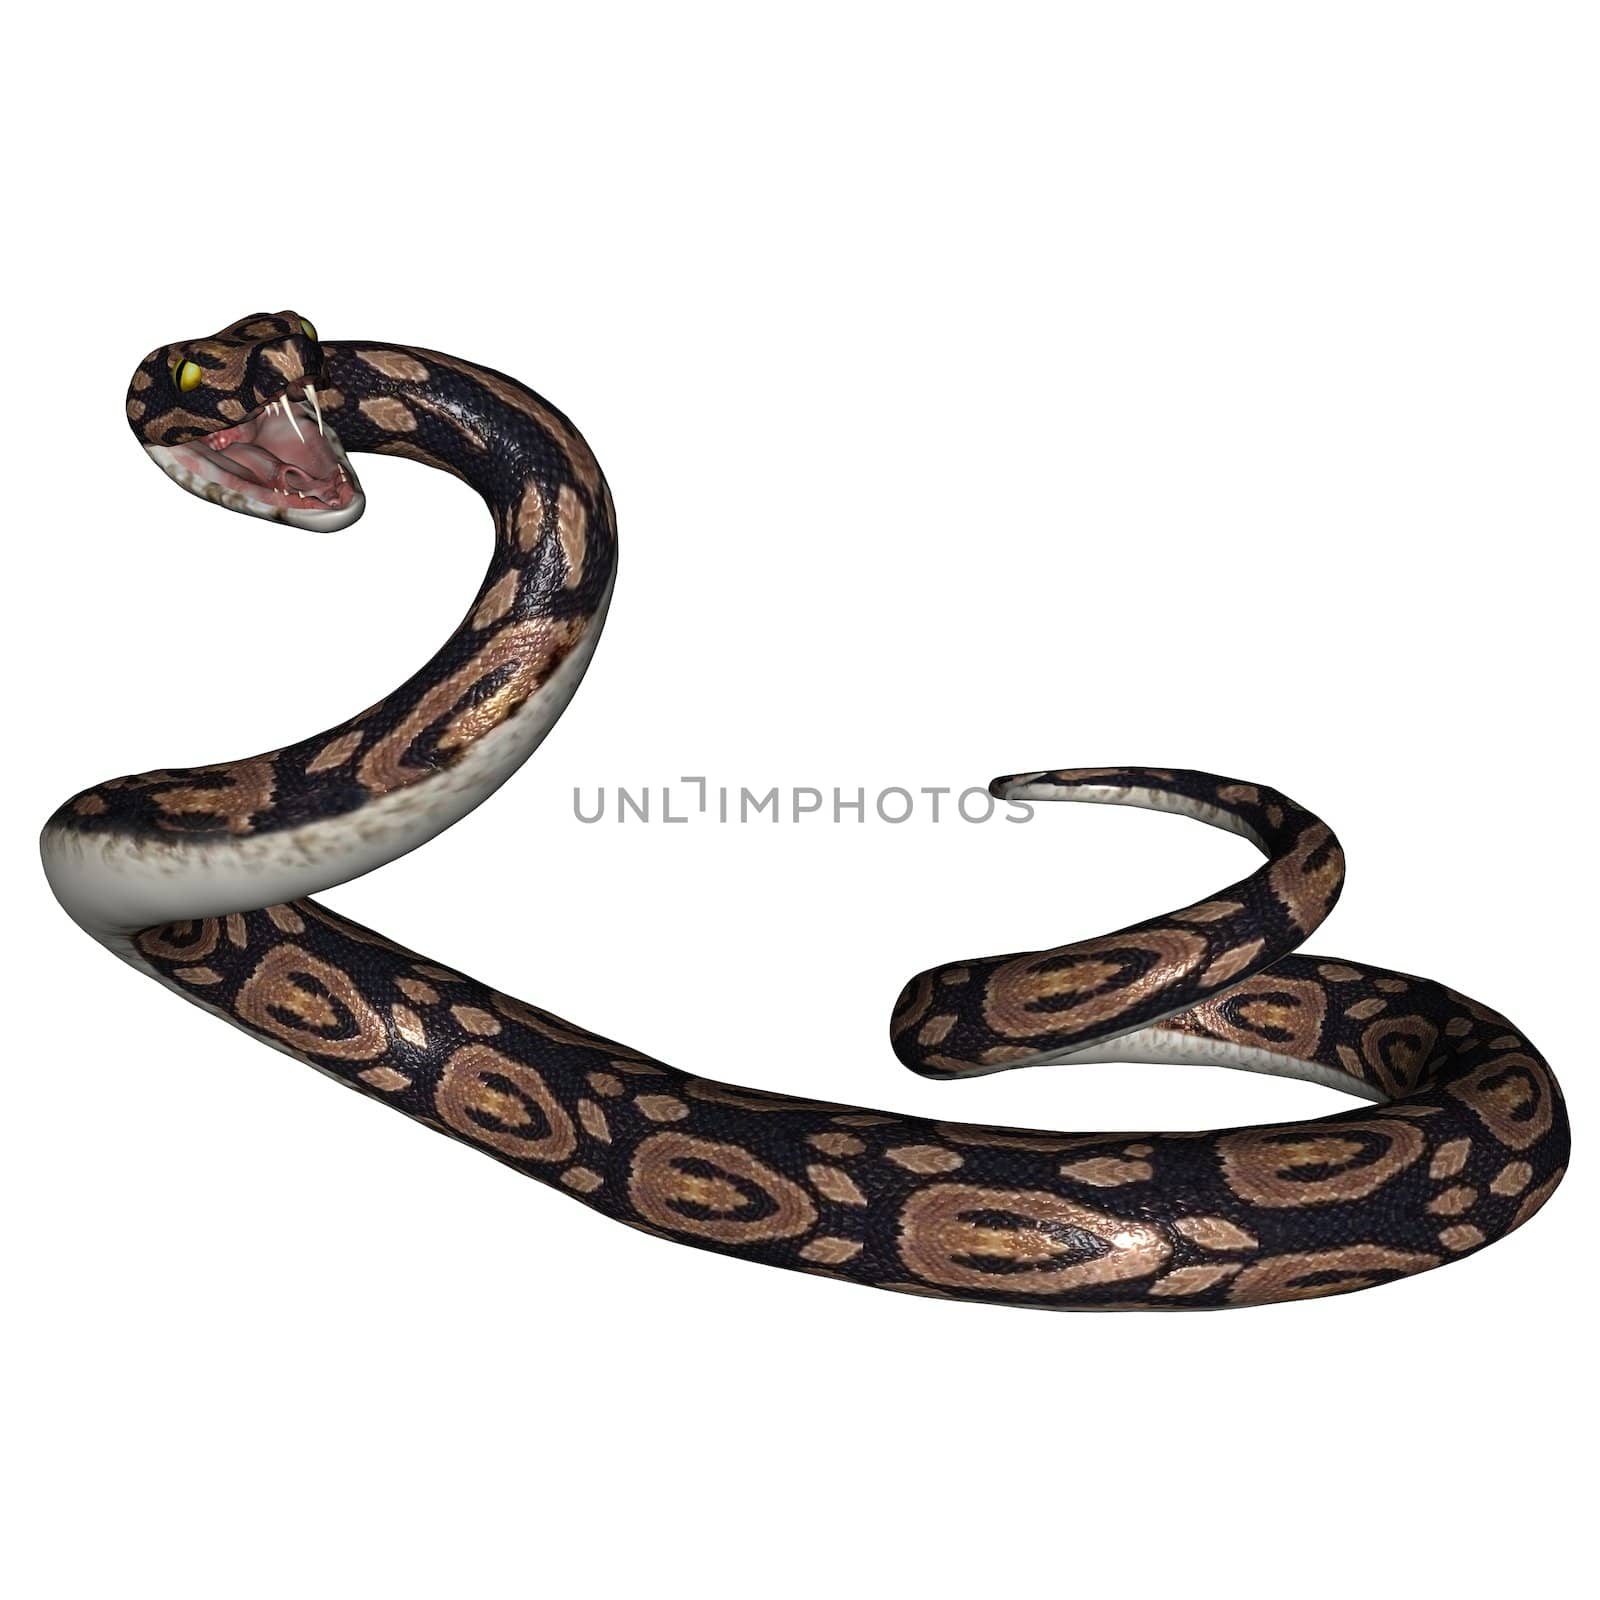 3D rendered snake on white background isloated